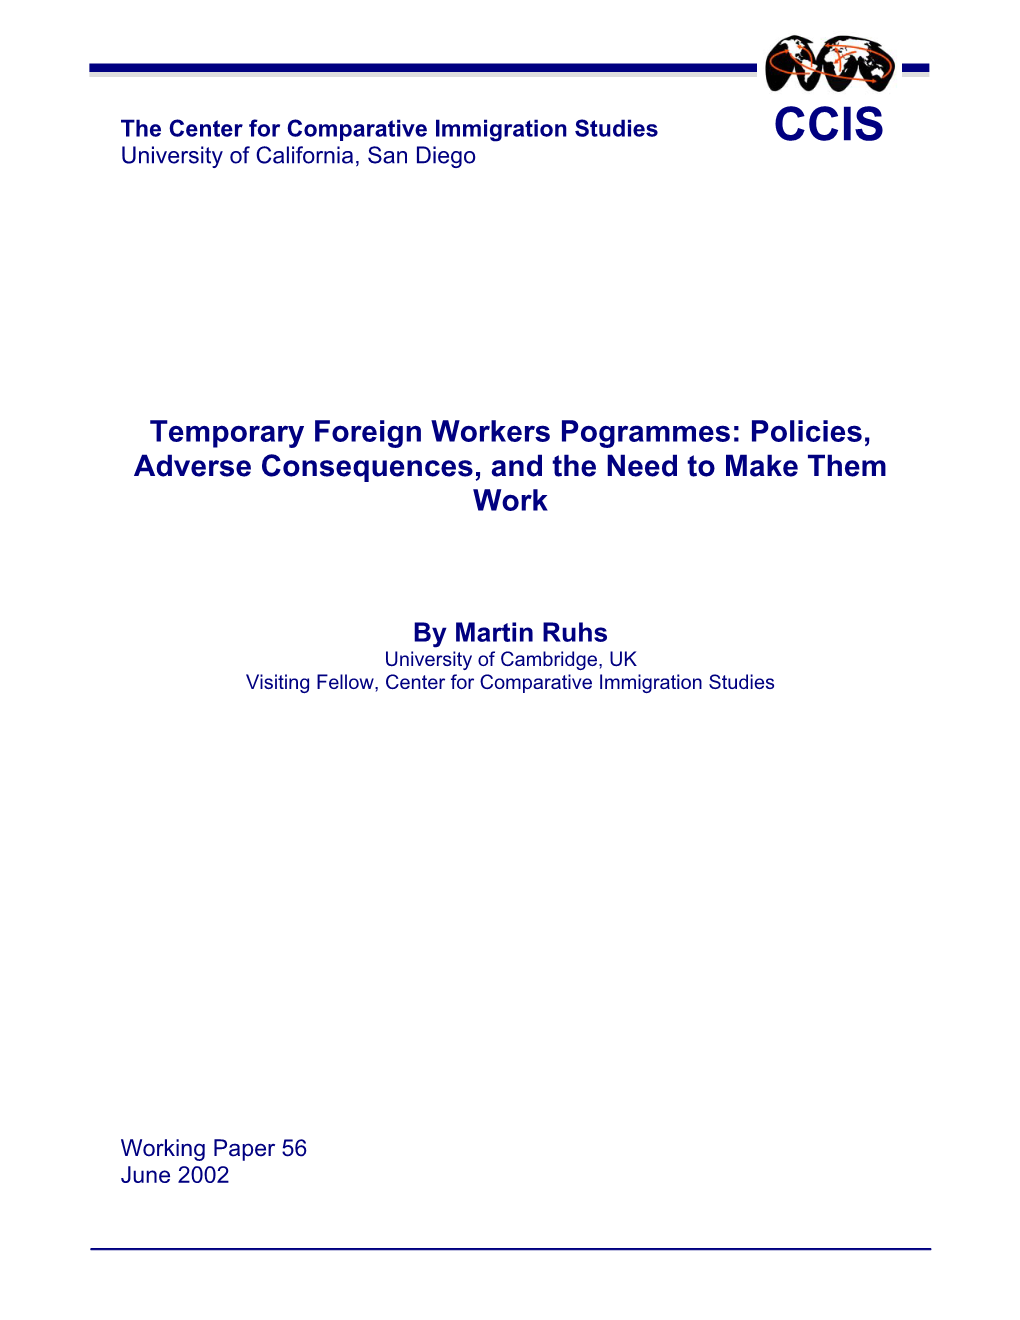 Temporary Foreign Workers Pogrammes: Policies, Adverse Consequences, and the Need to Make Them Work